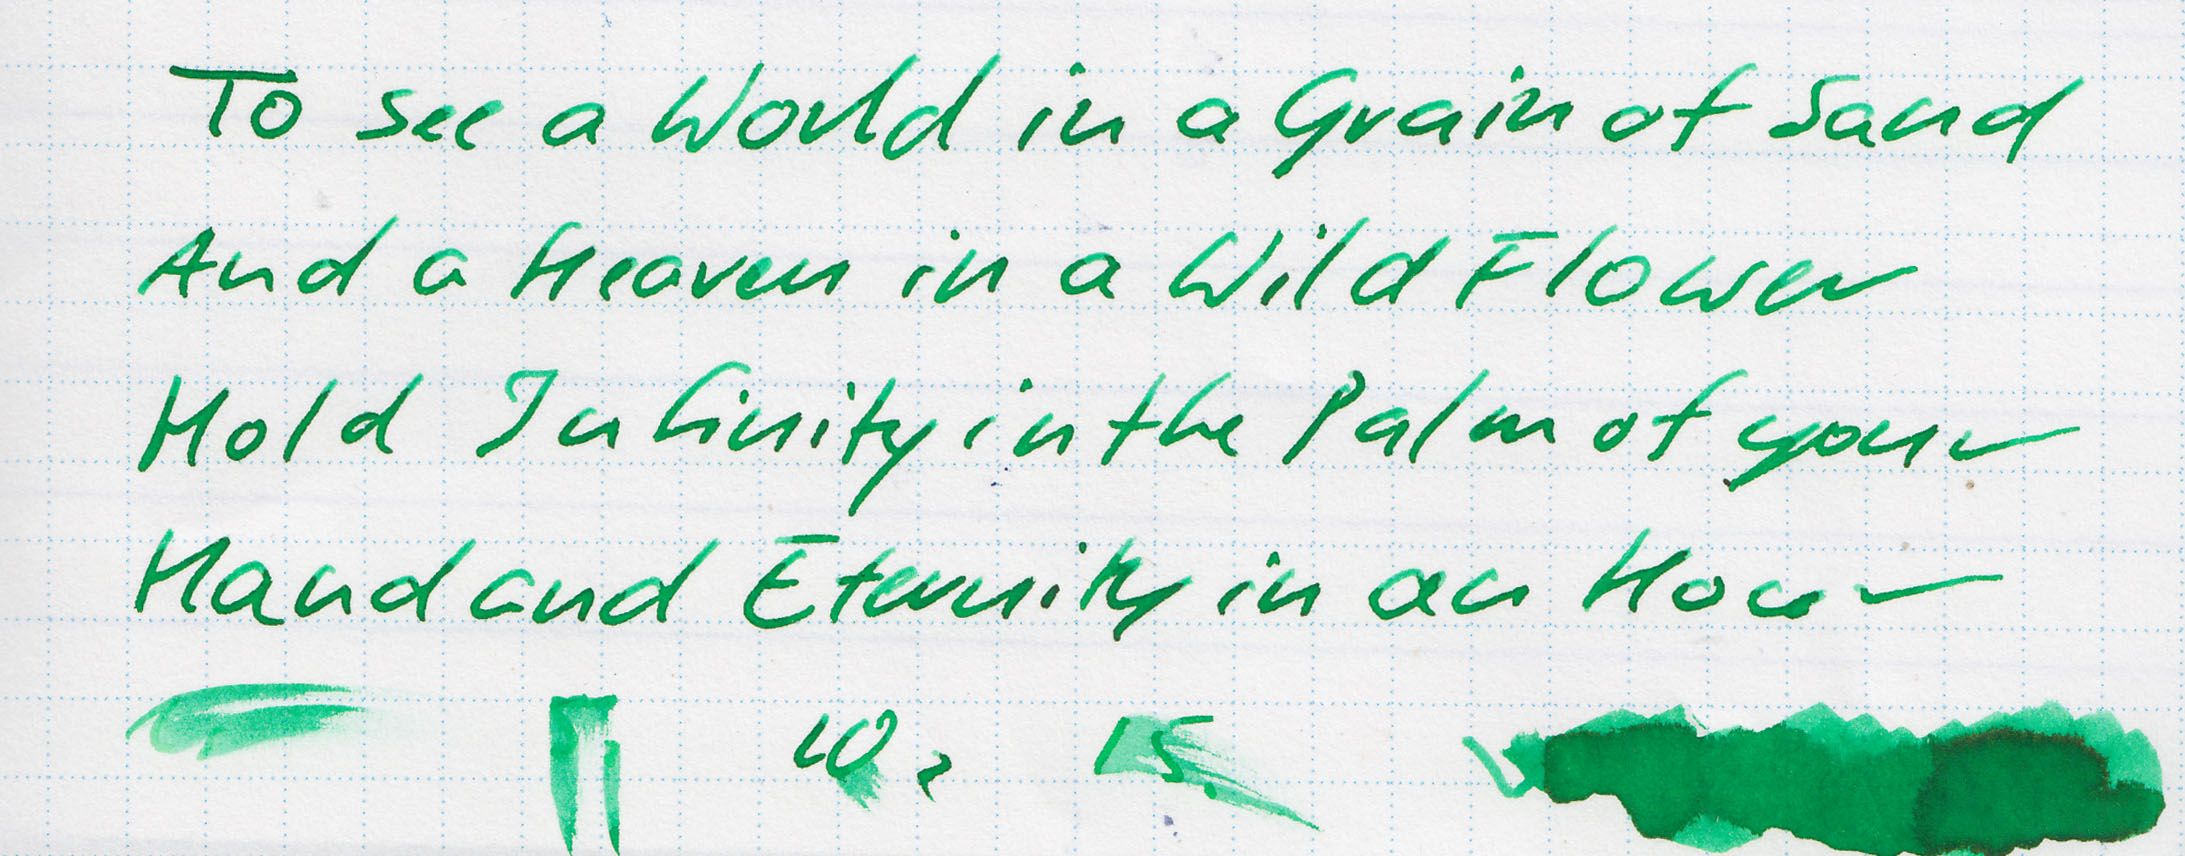 Ink Review #1259: Diamine Woodland Green — Mountain of Ink